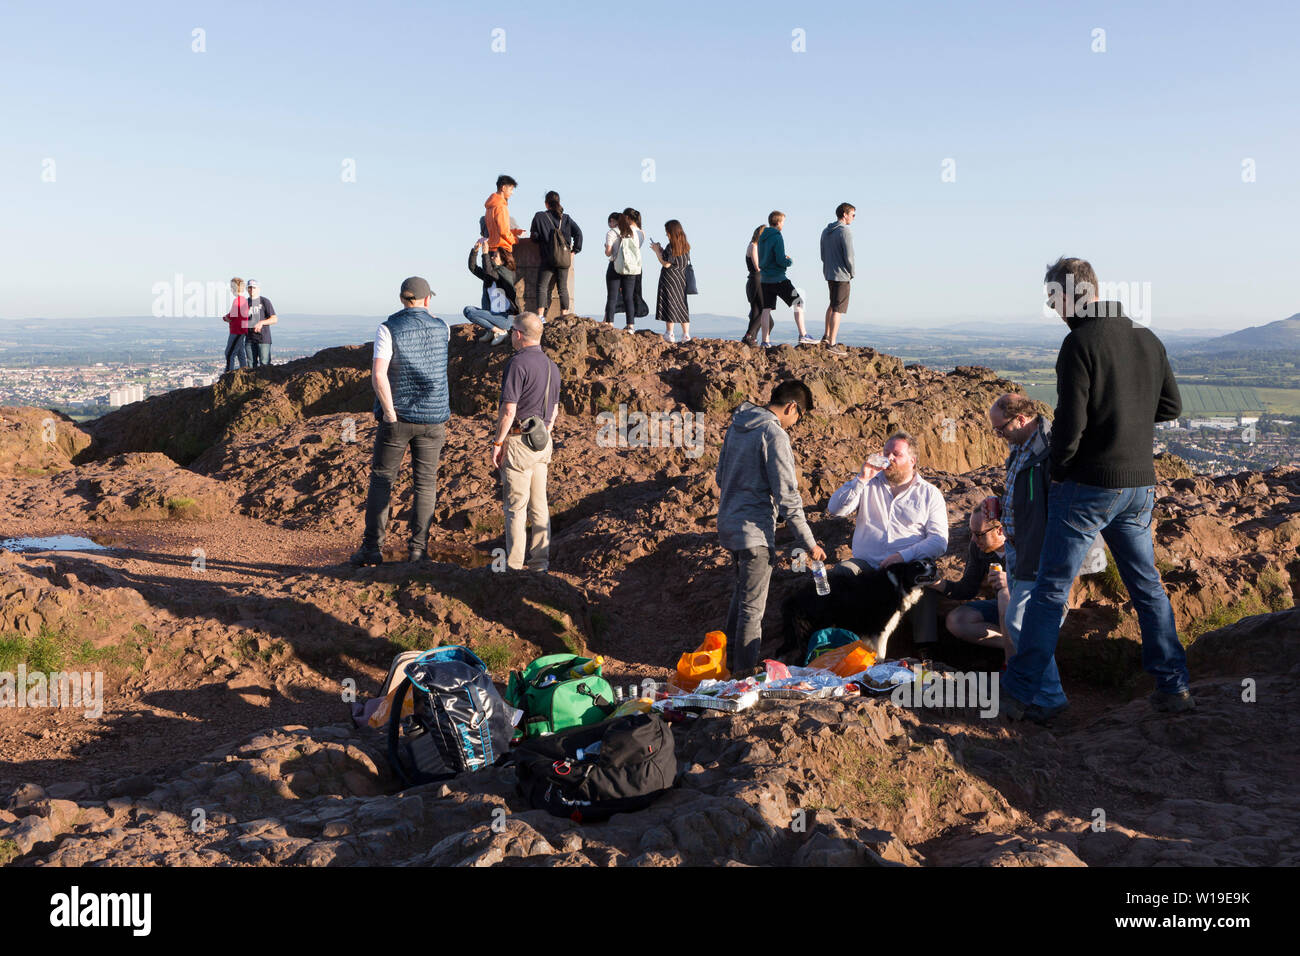 Visitors and a group of men with drinks and food enjoy summer evening sunshine on the summit of Arthur's Seat in Holyrood Park, overlooking the city of Edinburgh, on 26th June 2019, in Edinburgh, Scotland. Arthur's Seat is an extinct volcano which is considered the main peak of the group of hills in Edinburgh, Scotland, which form most of Holyrood Park, described by Robert Louis Stevenson as 'a hill for magnitude, a mountain in virtue of its bold design'. The hill rises above the city to a height of 250.5 m (822 ft), providing excellent panoramic views of the city and beyond. Stock Photo